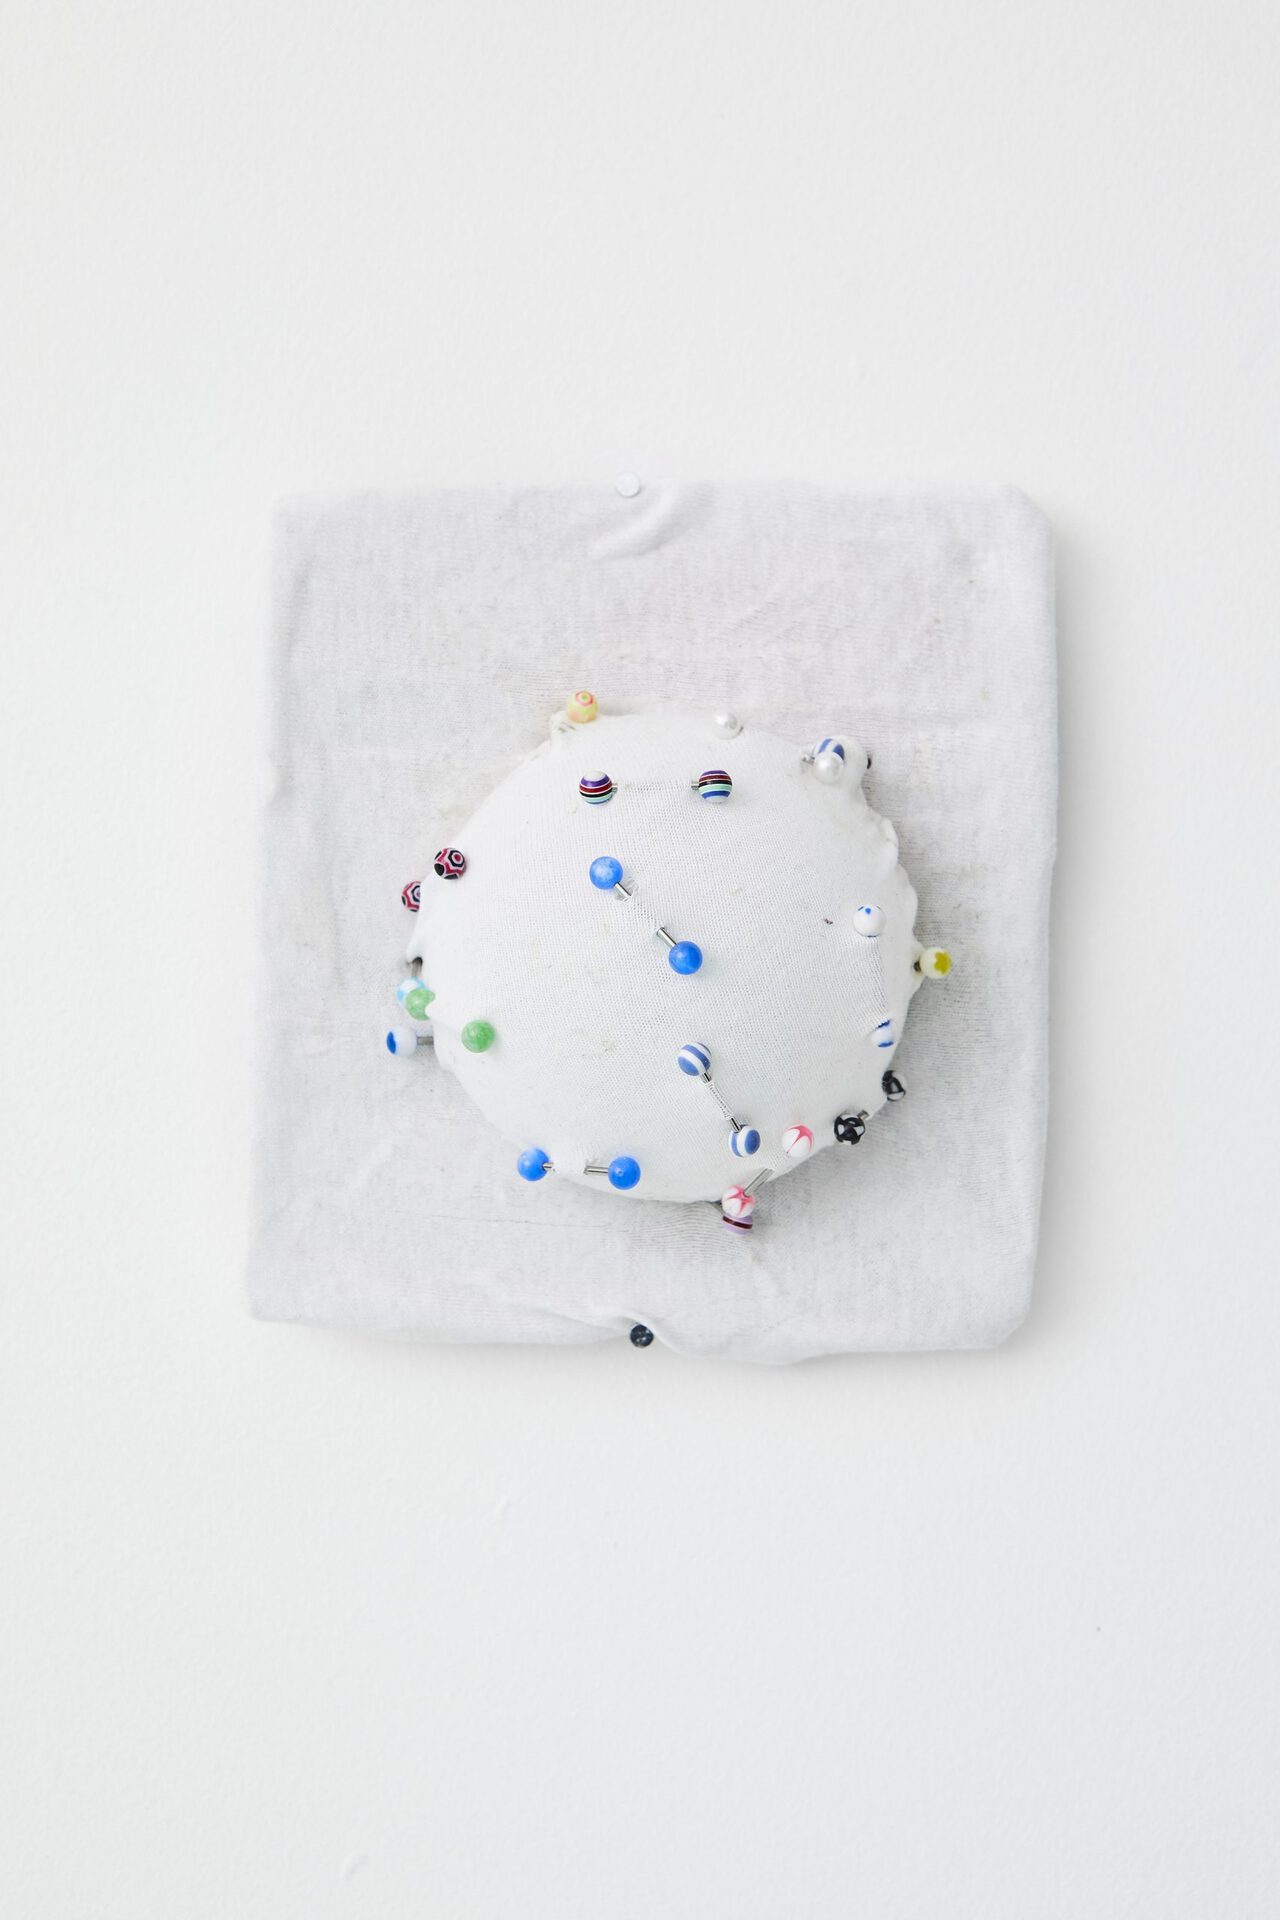 Victoria Todorov Title not known, 2019 Poly cotton, glue, tongue piercing barbells, plastic